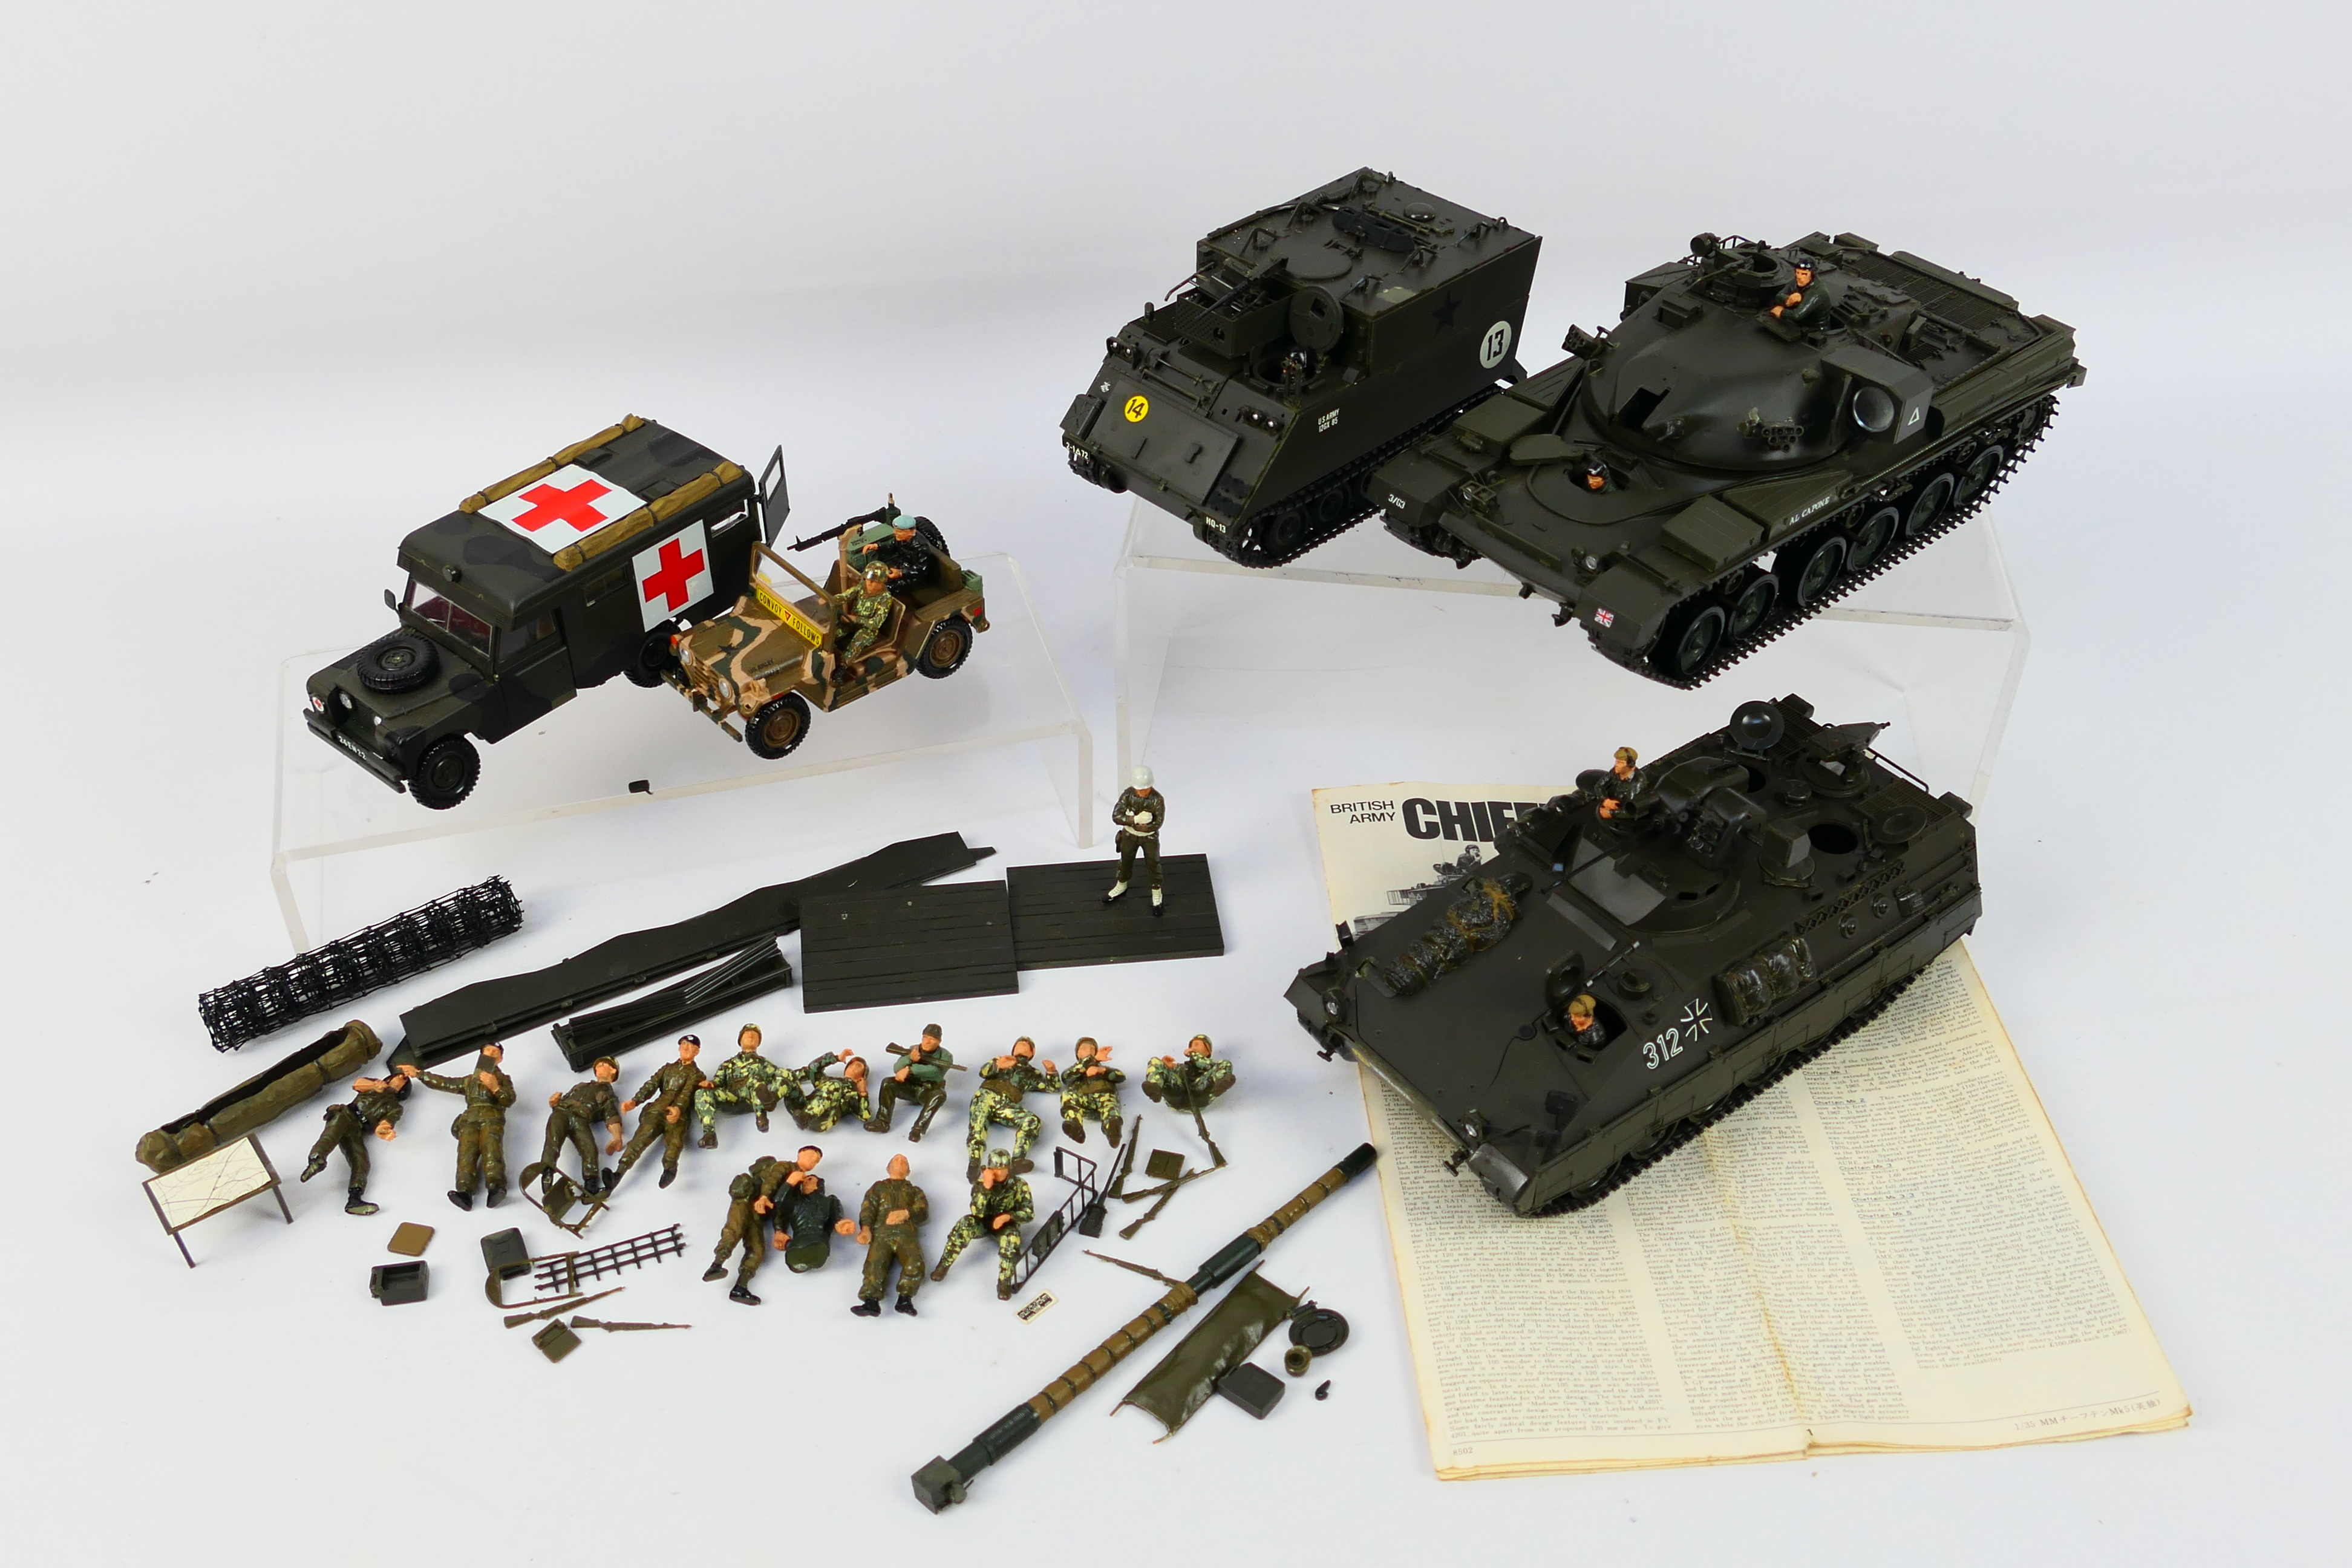 Tamiya - A collection of built Tamiya military vehicle kits in 1/35 scale including a Chieftain Mk5,